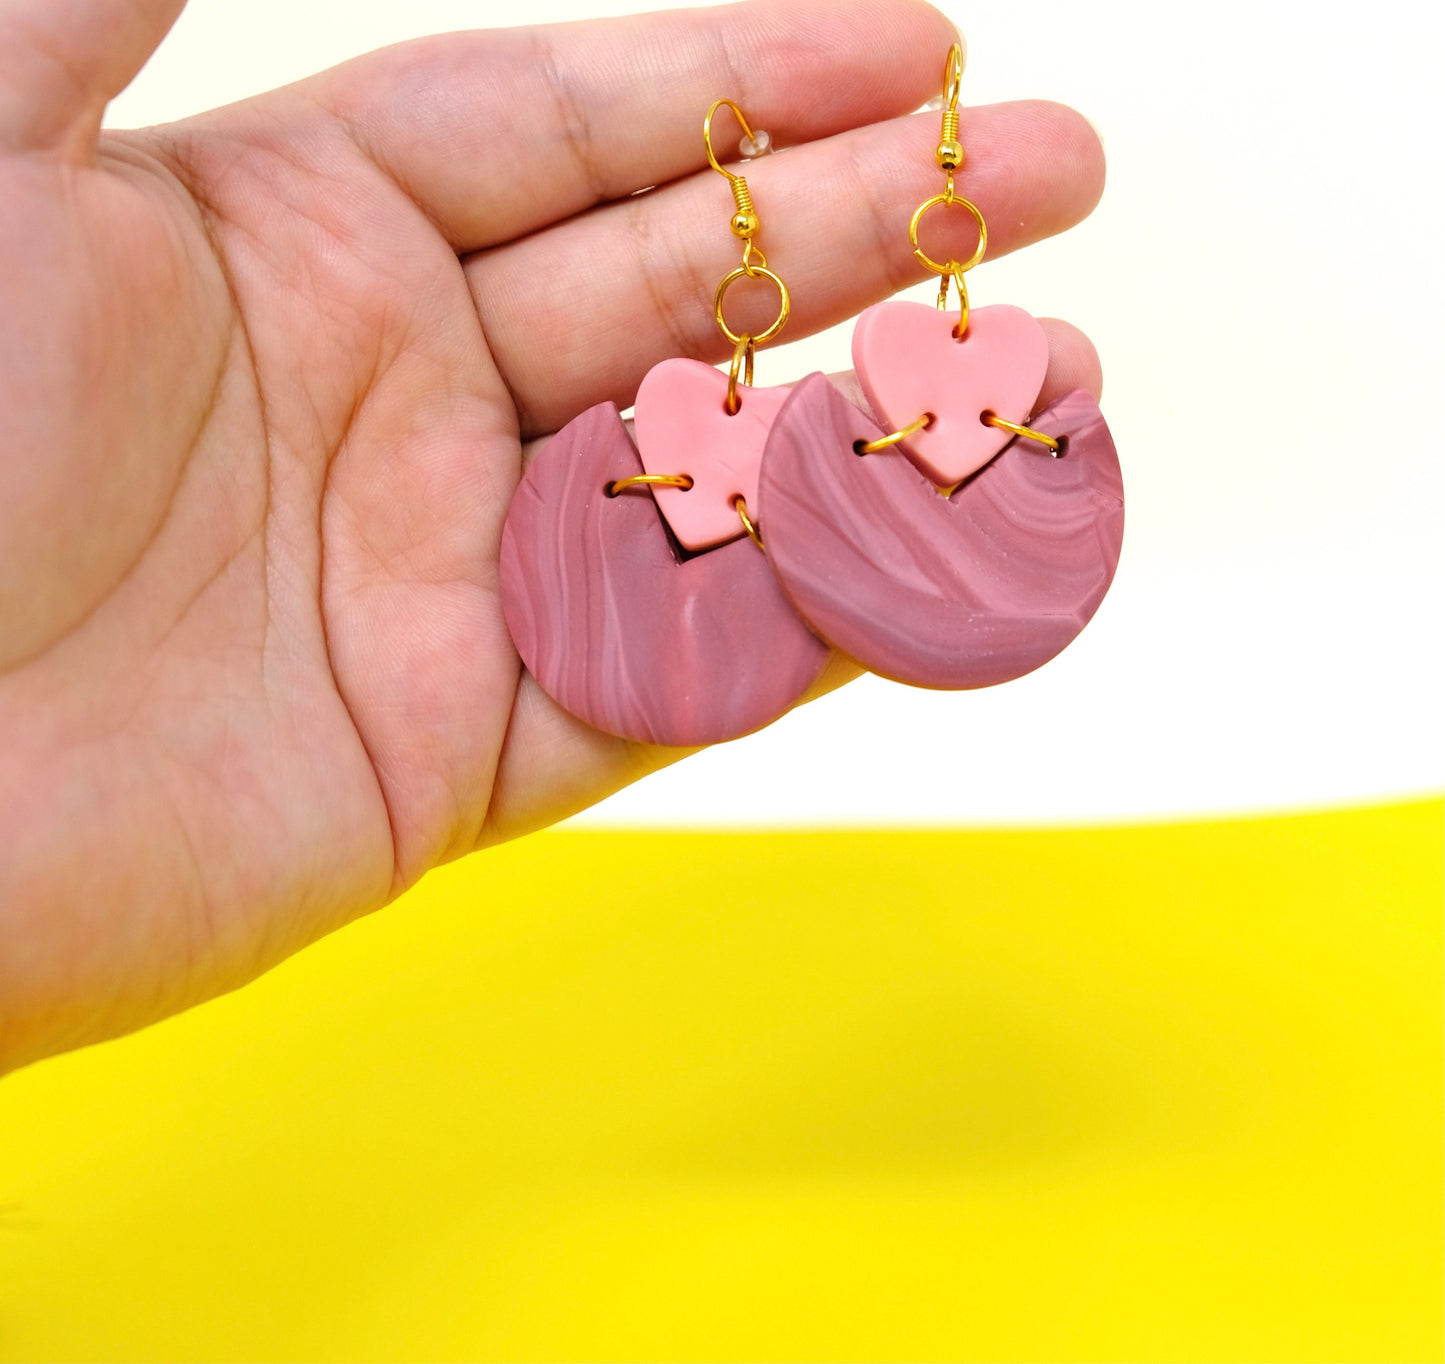 One Off Handmade Polymer Clay Earrings - Assorted Hearts and Moon Earrings - Valentine's Day Collection - Imperfectly Perfect Seconds